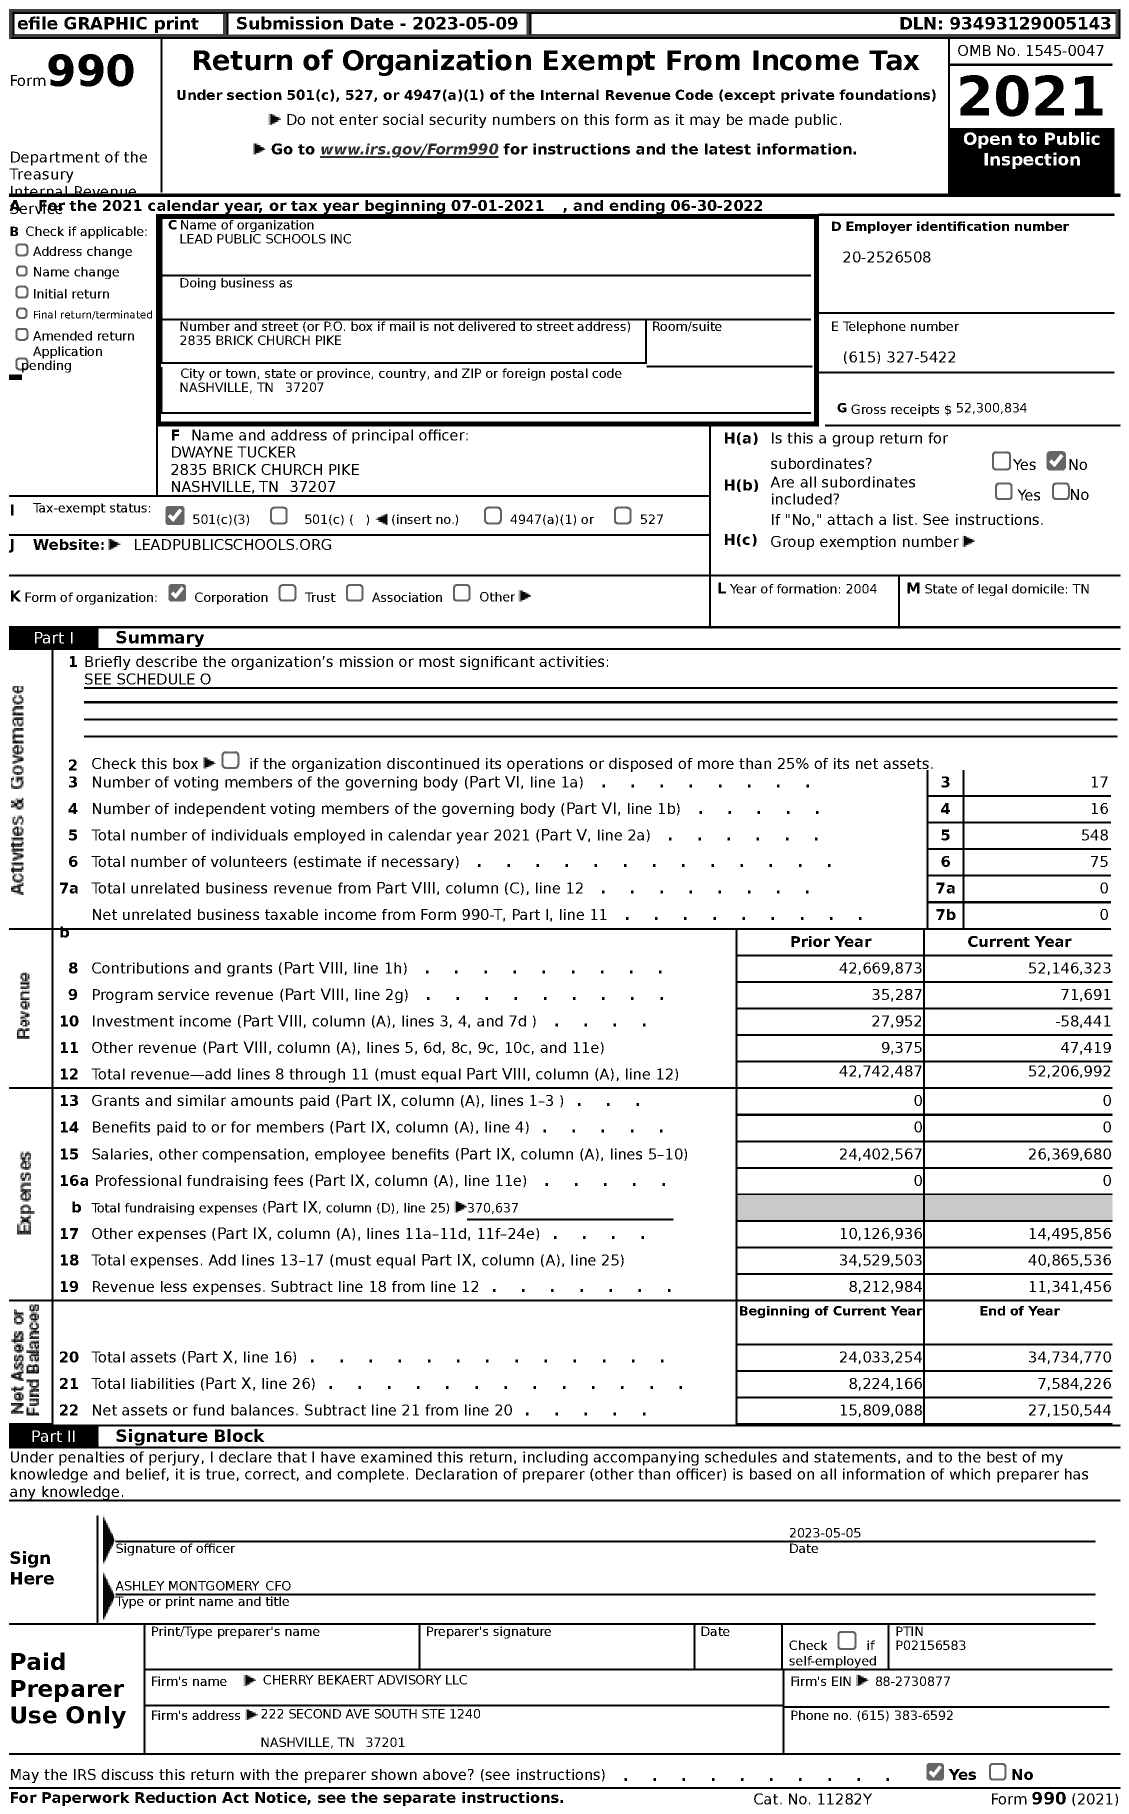 Image of first page of 2021 Form 990 for Lead Public Schools